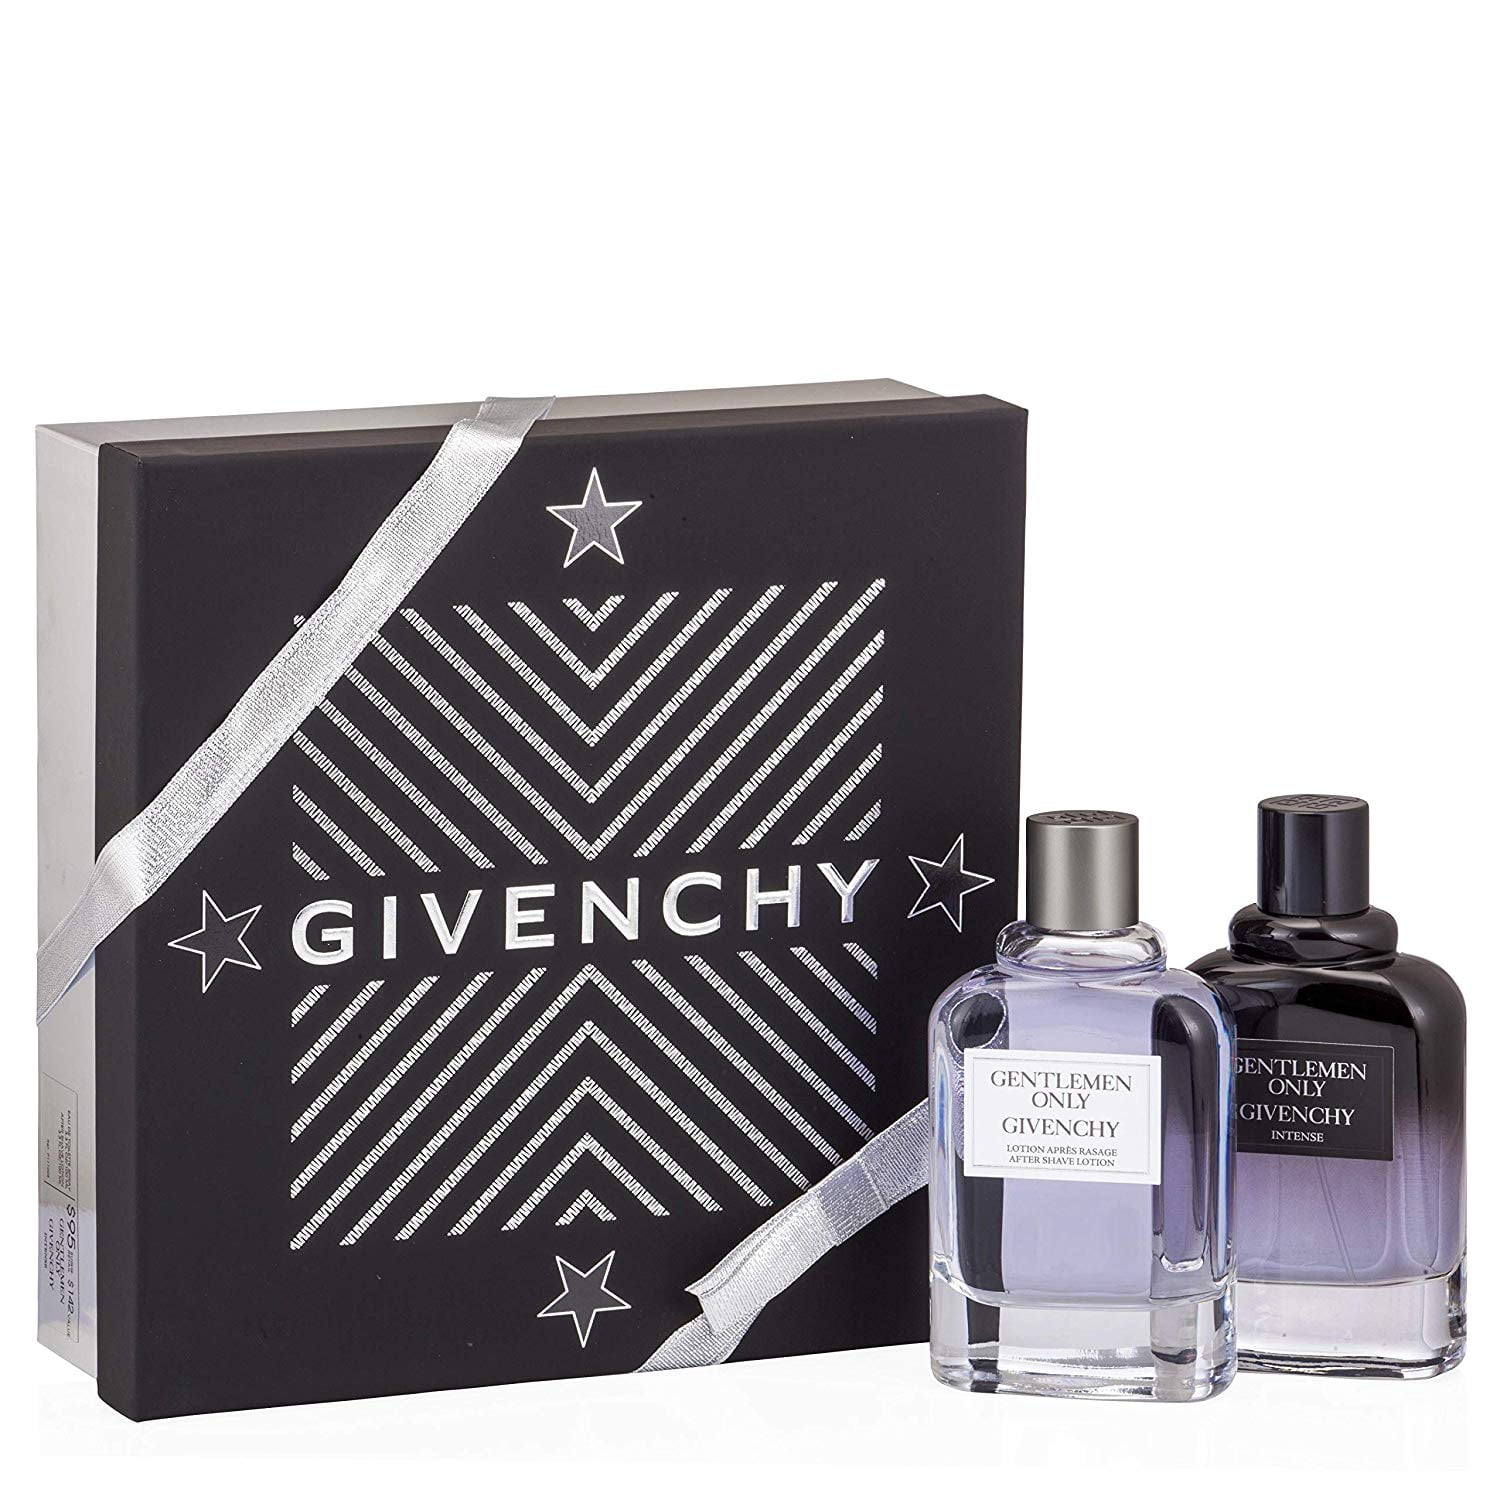 givenchy only men